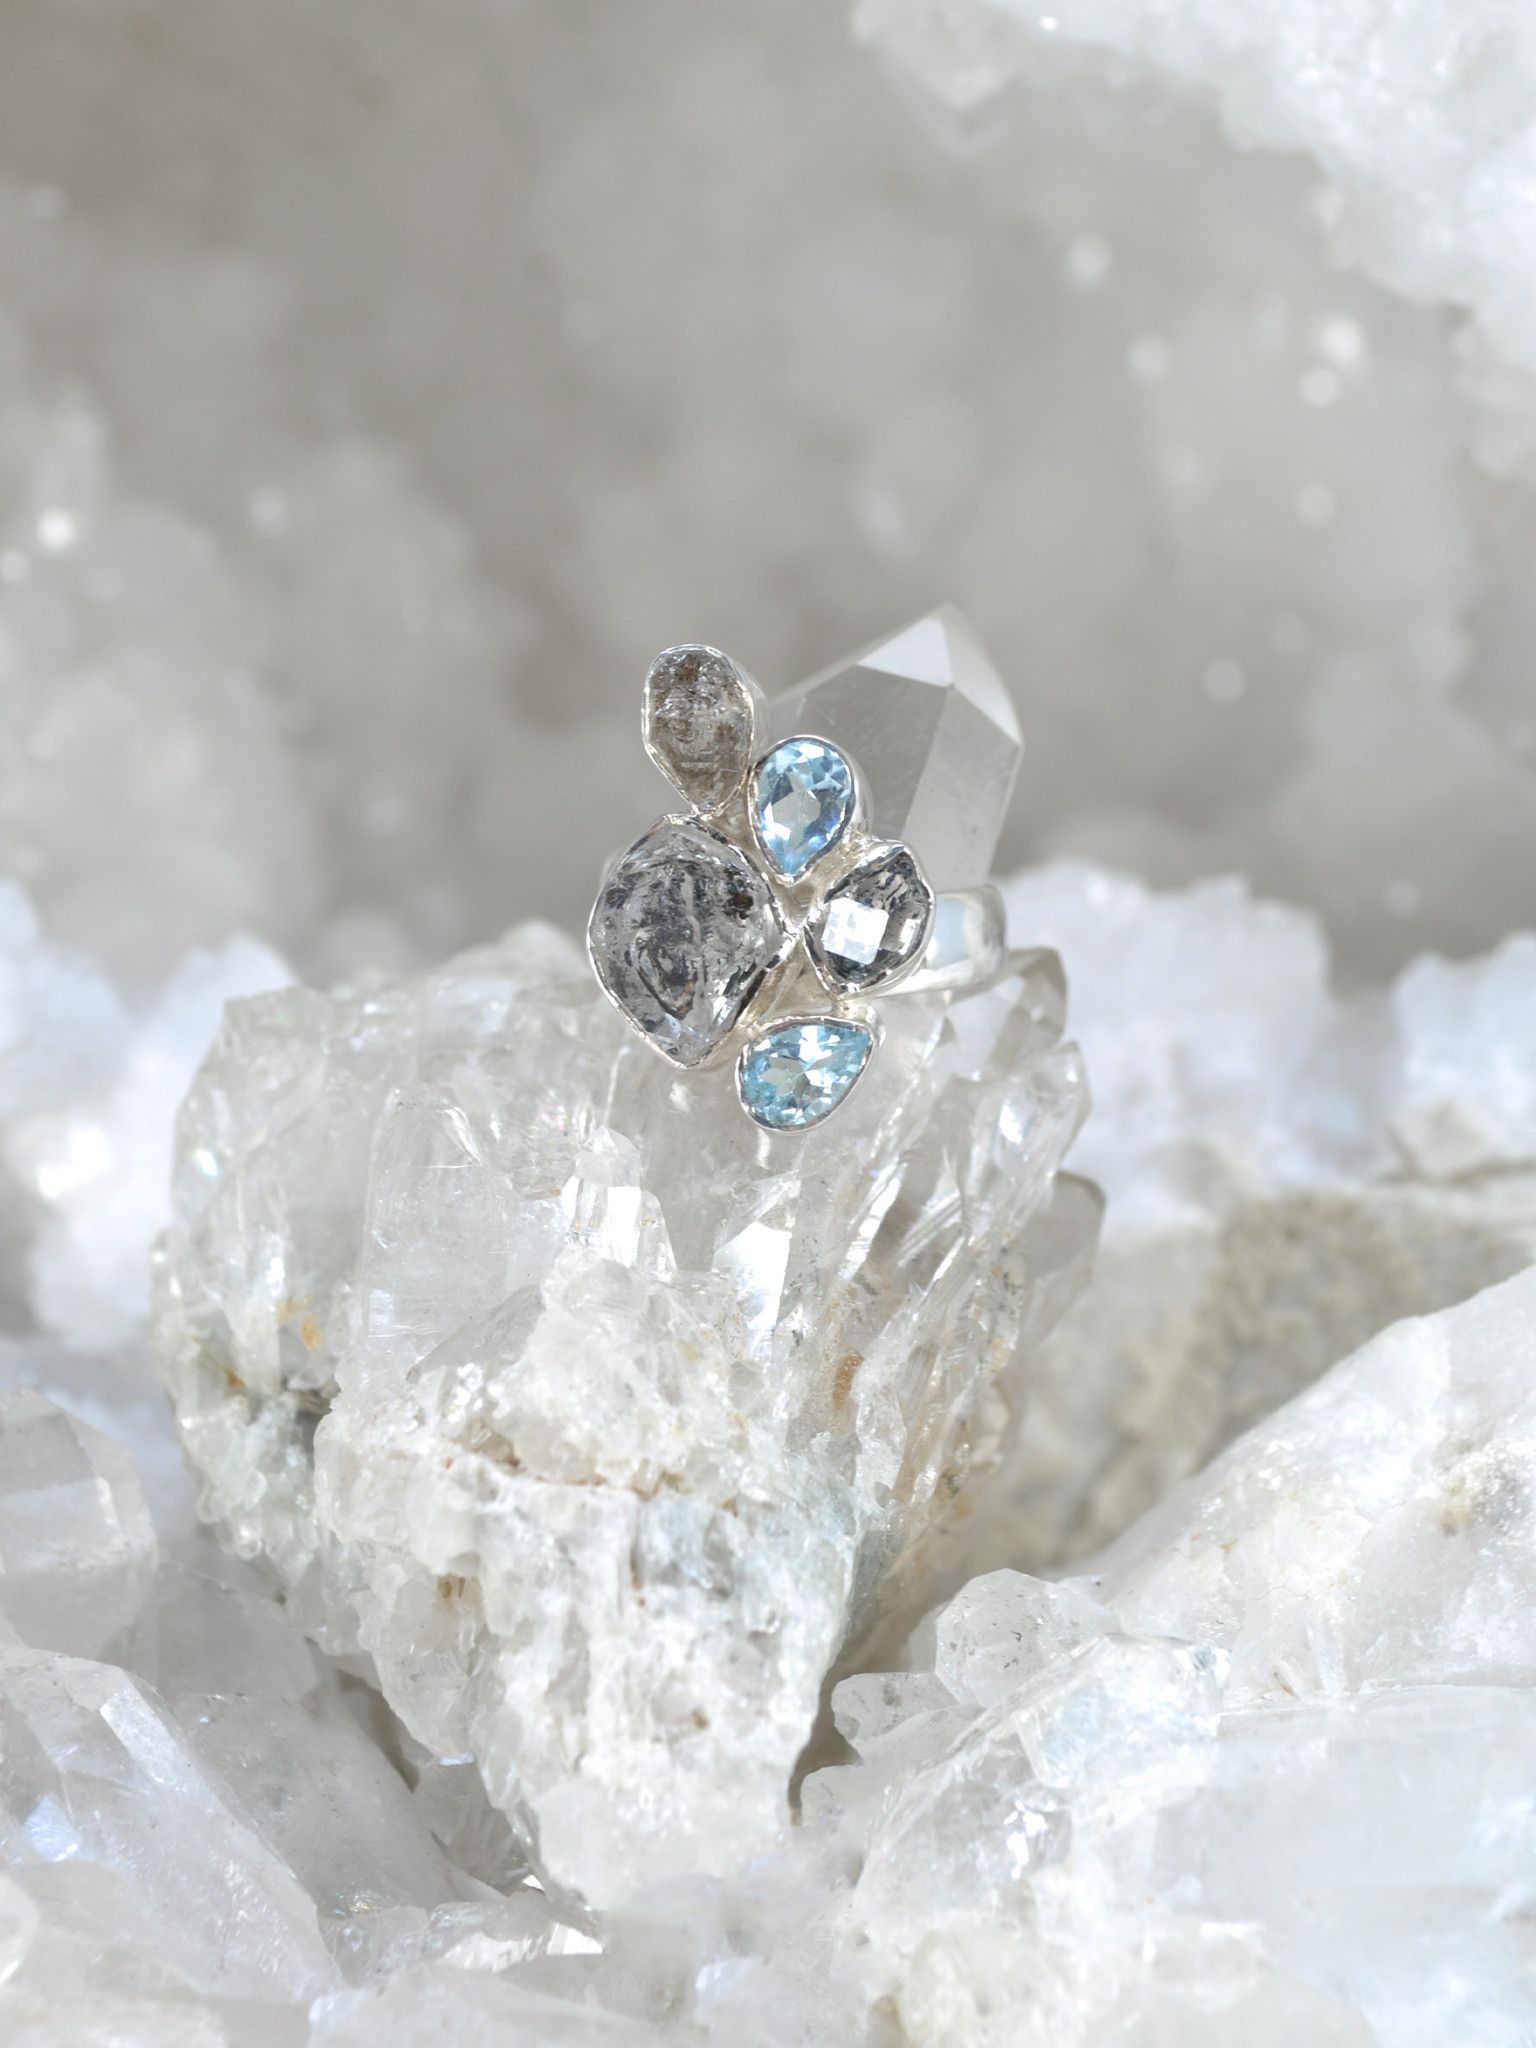 A silver ring with a cluster of herkimer diamonds and blue topaz on top of a crystal - Diamond